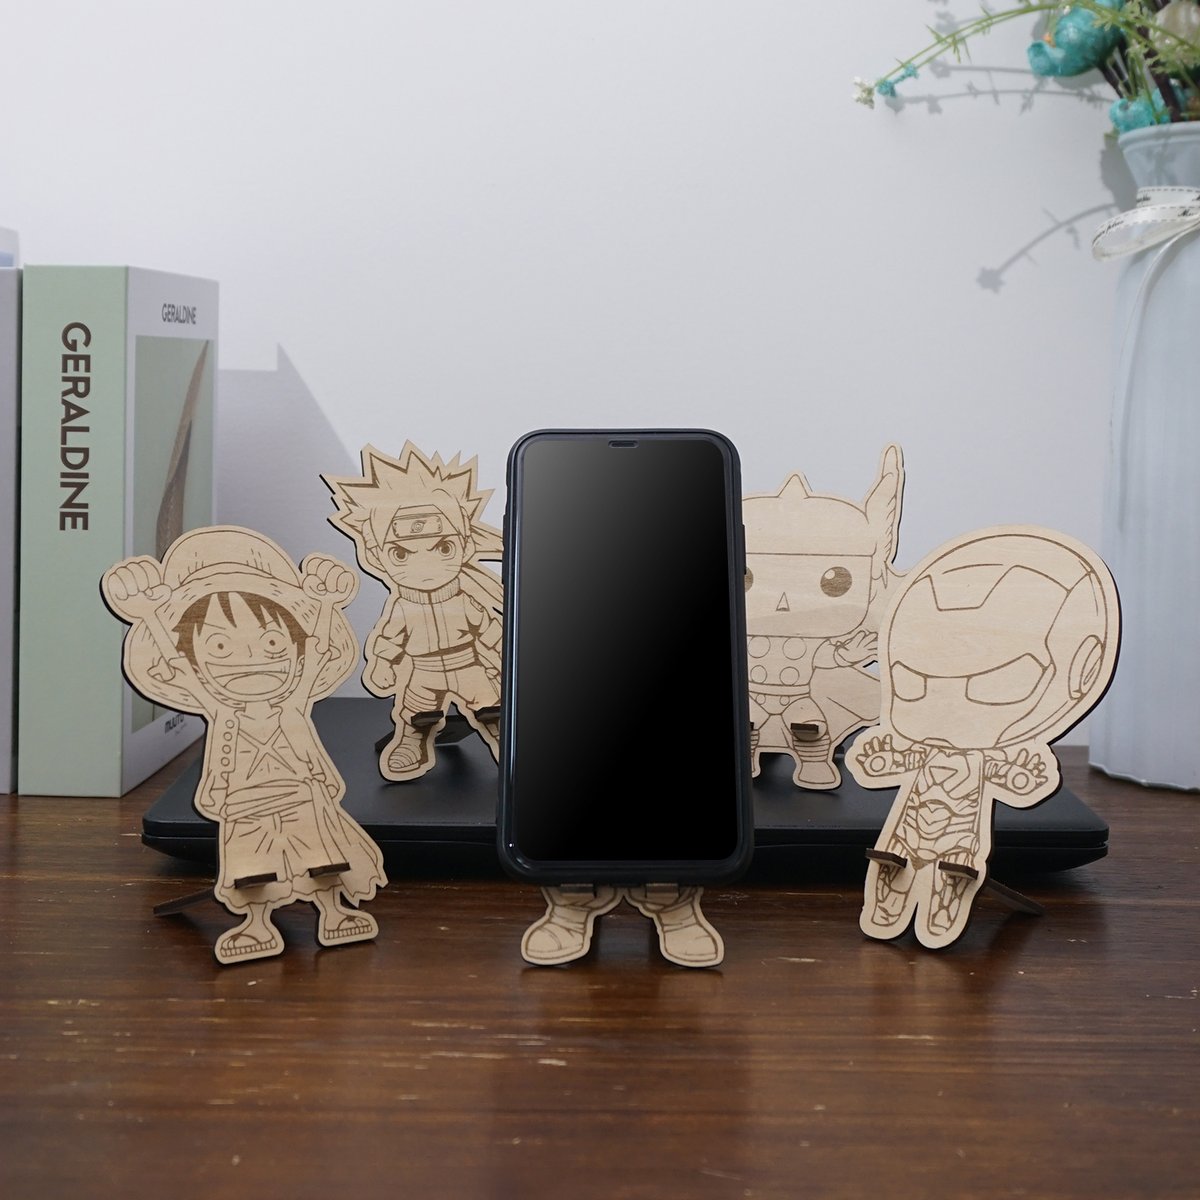 Perfect!✌😬

Comic IP Phone Holder
Machine: ACMER P2 33W 
Material: 3mm Plywood
Cutting Speed: 400mm/min
Cutting Power: 100%

#ACMER #EngraveYourLoveWithACMER #laserengraving #lasercutting #laserengravingmachine #lasercuttingmachine